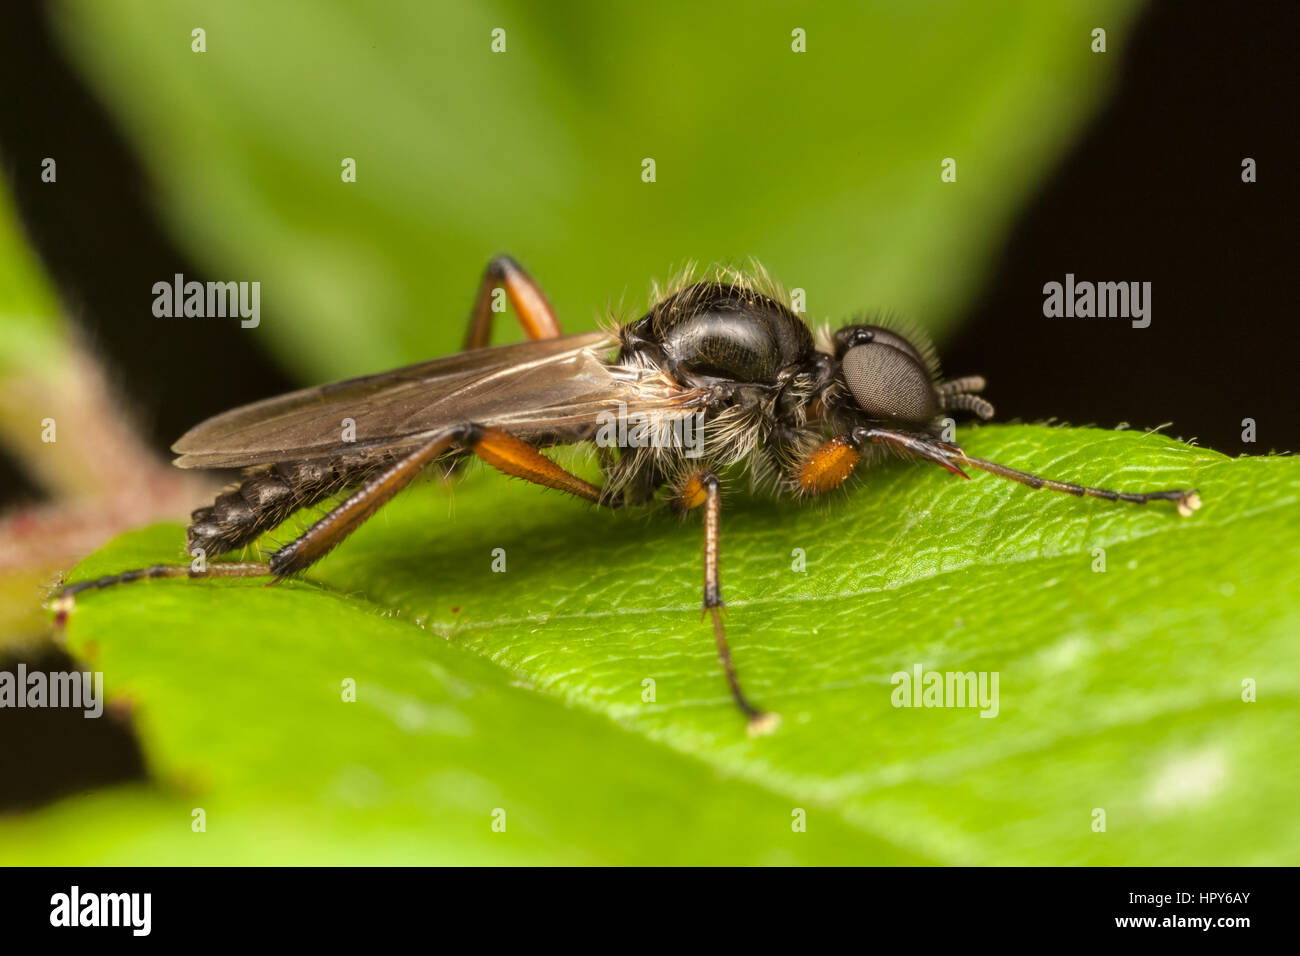 A male March Fly (Bibio articulatus) perches on a leaf. Stock Photo